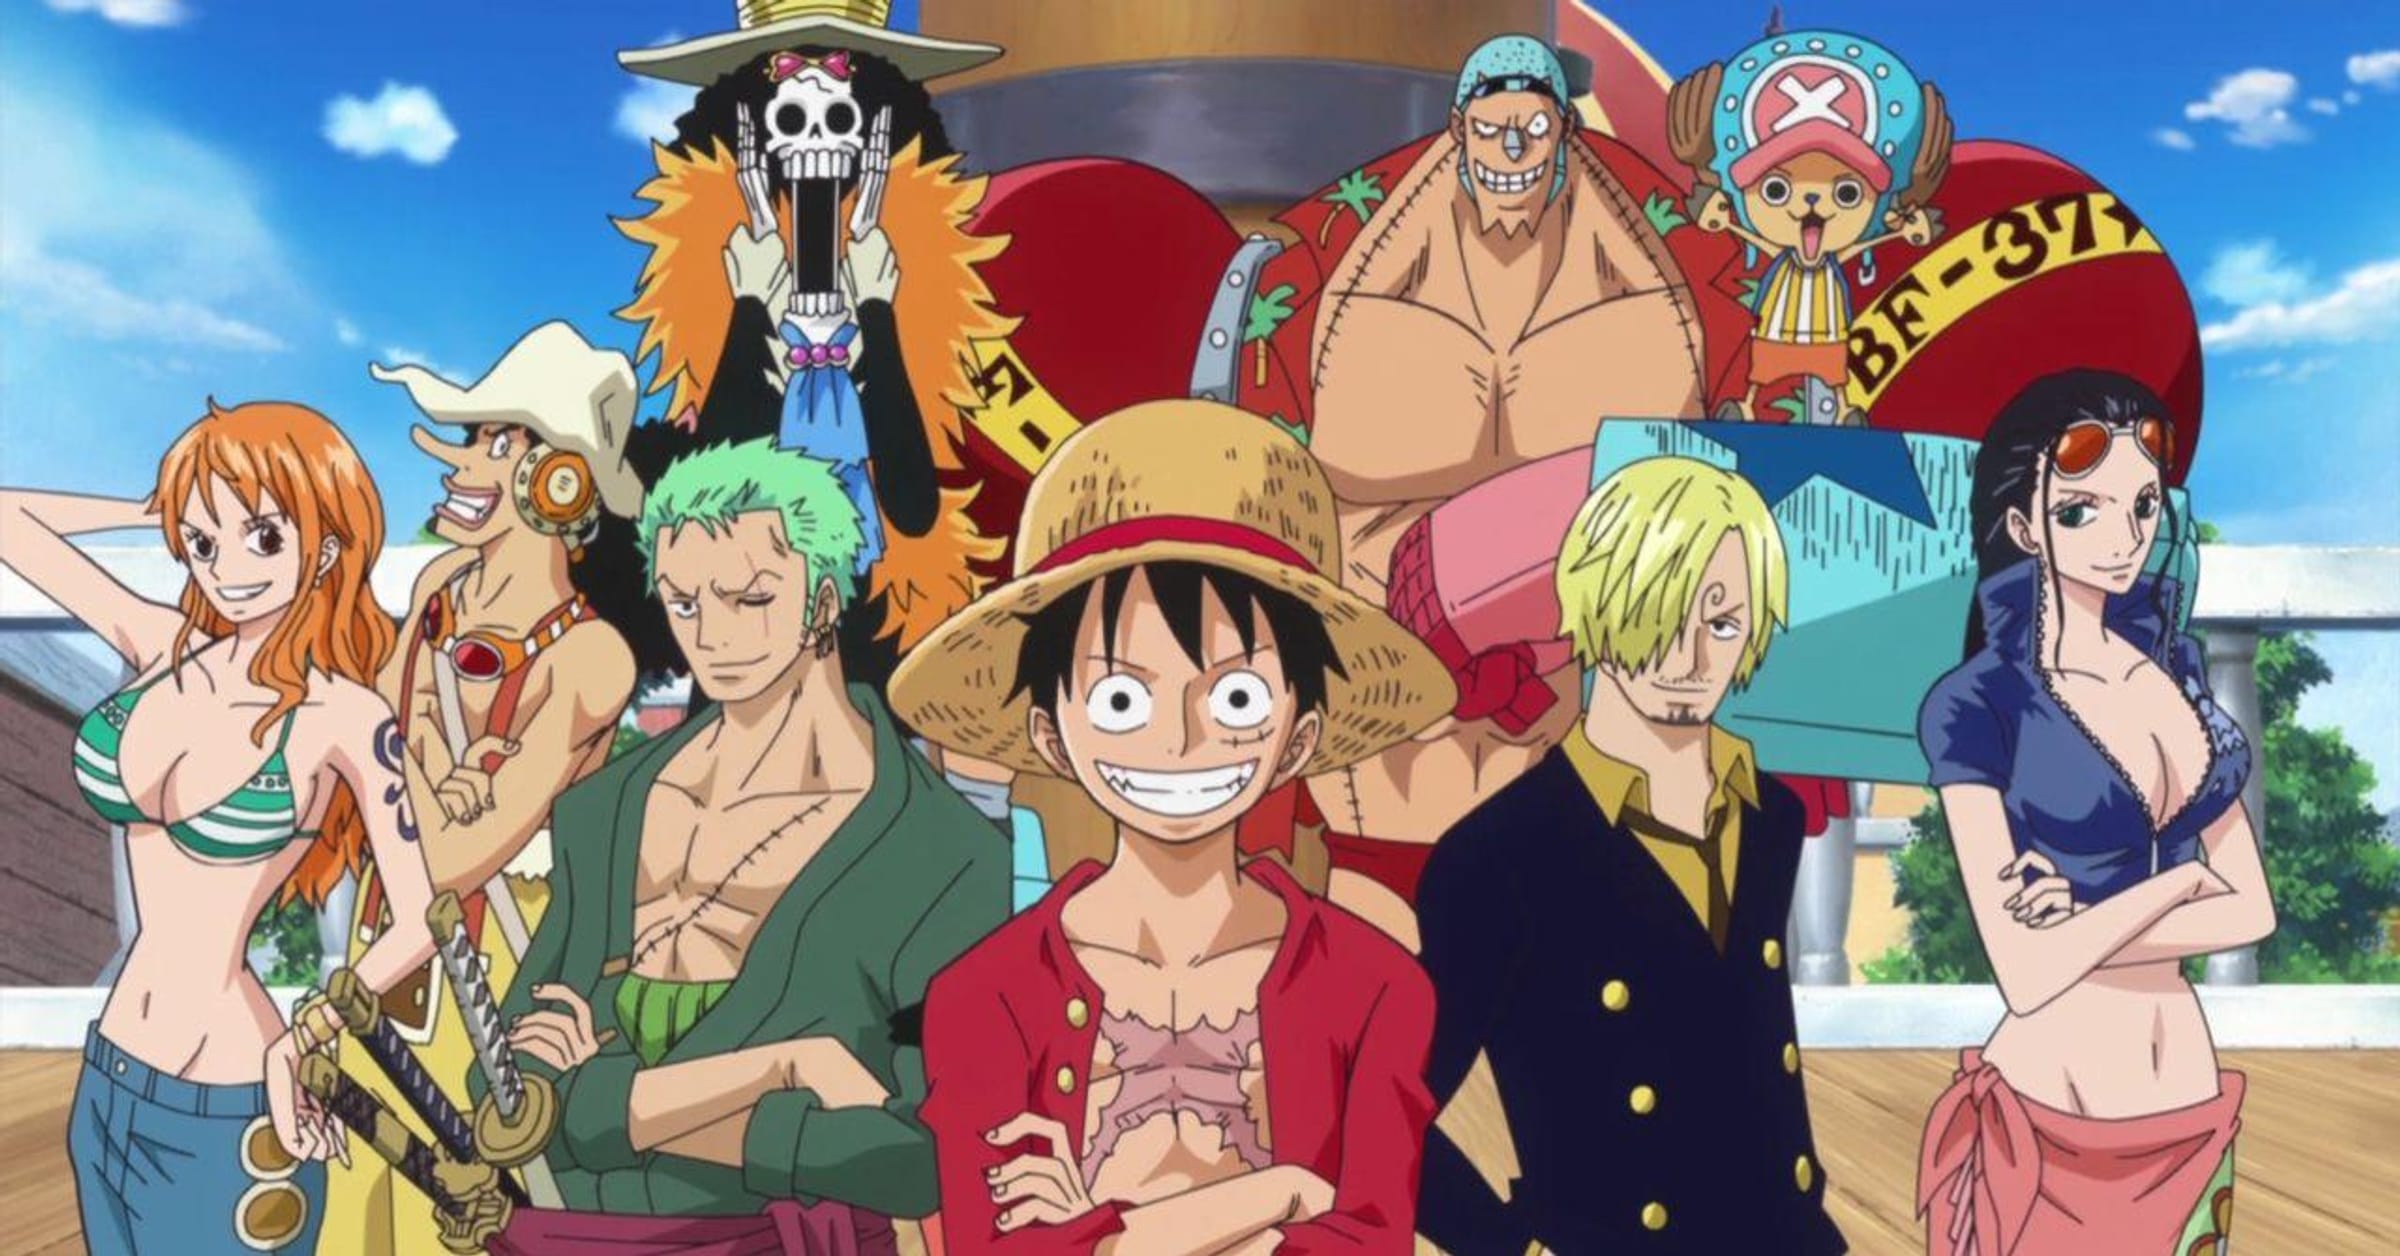 What other theories do yall think could be true? Lmk #onepiece #onepie